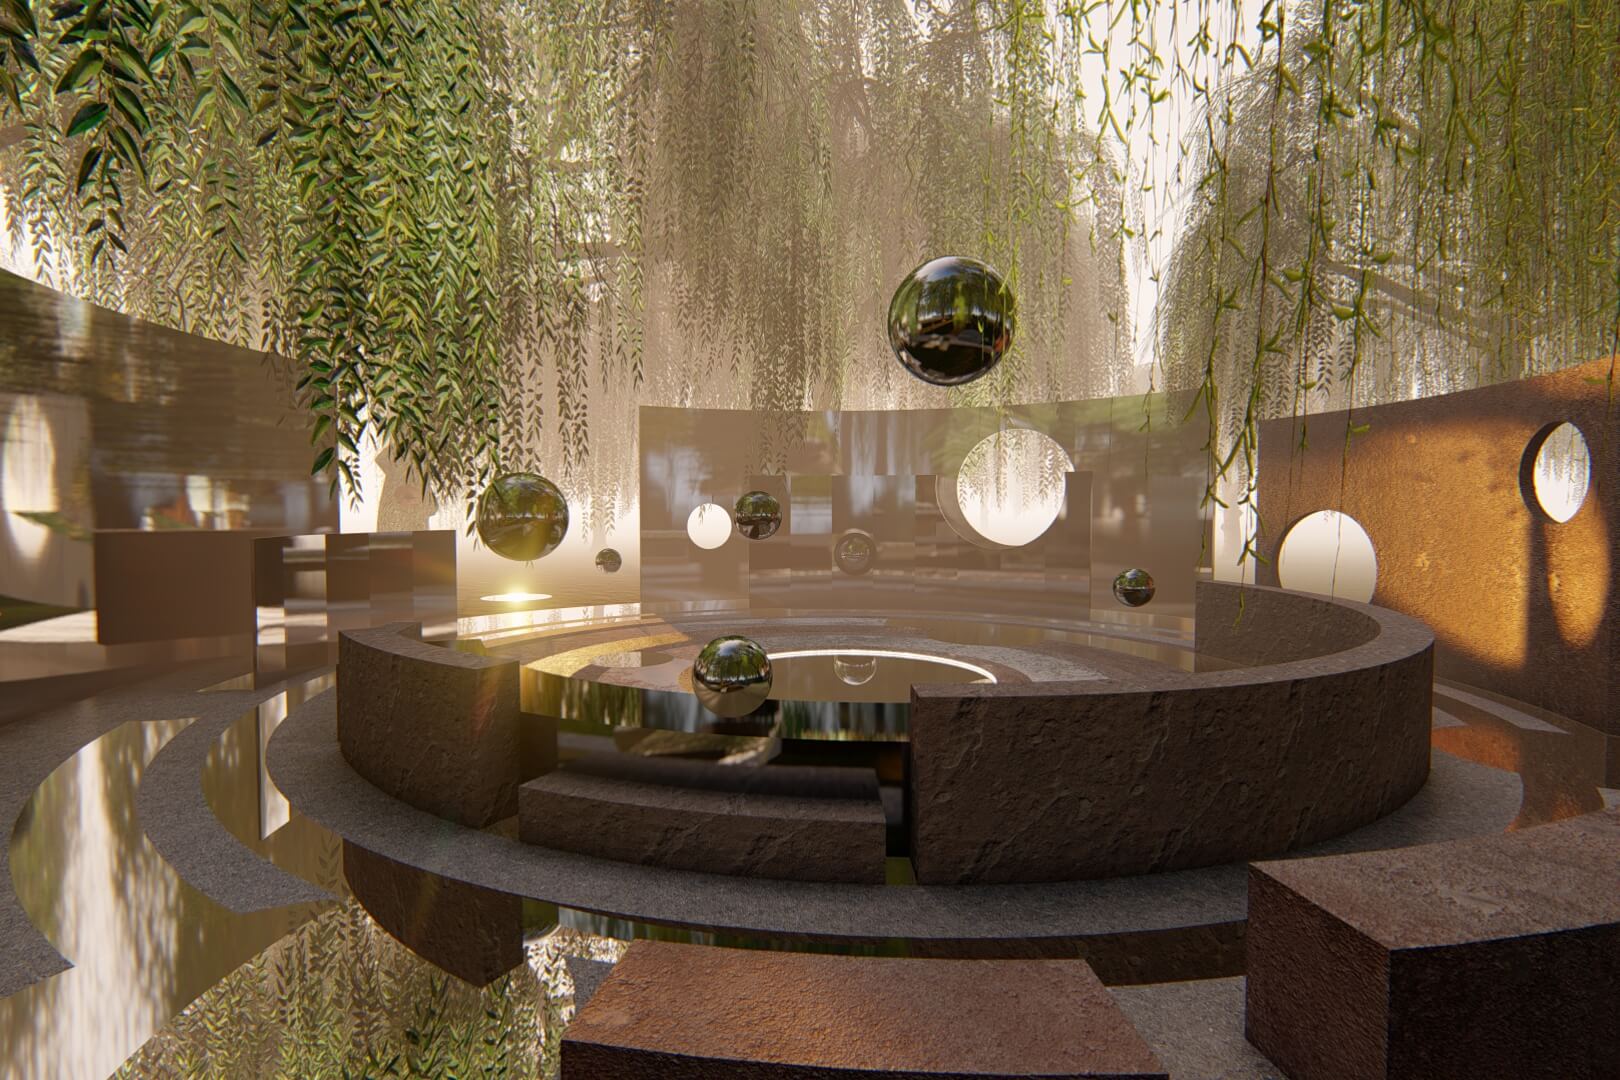 Concept of a sculptural modern space with reflective pools, circular walls and overhanging trees